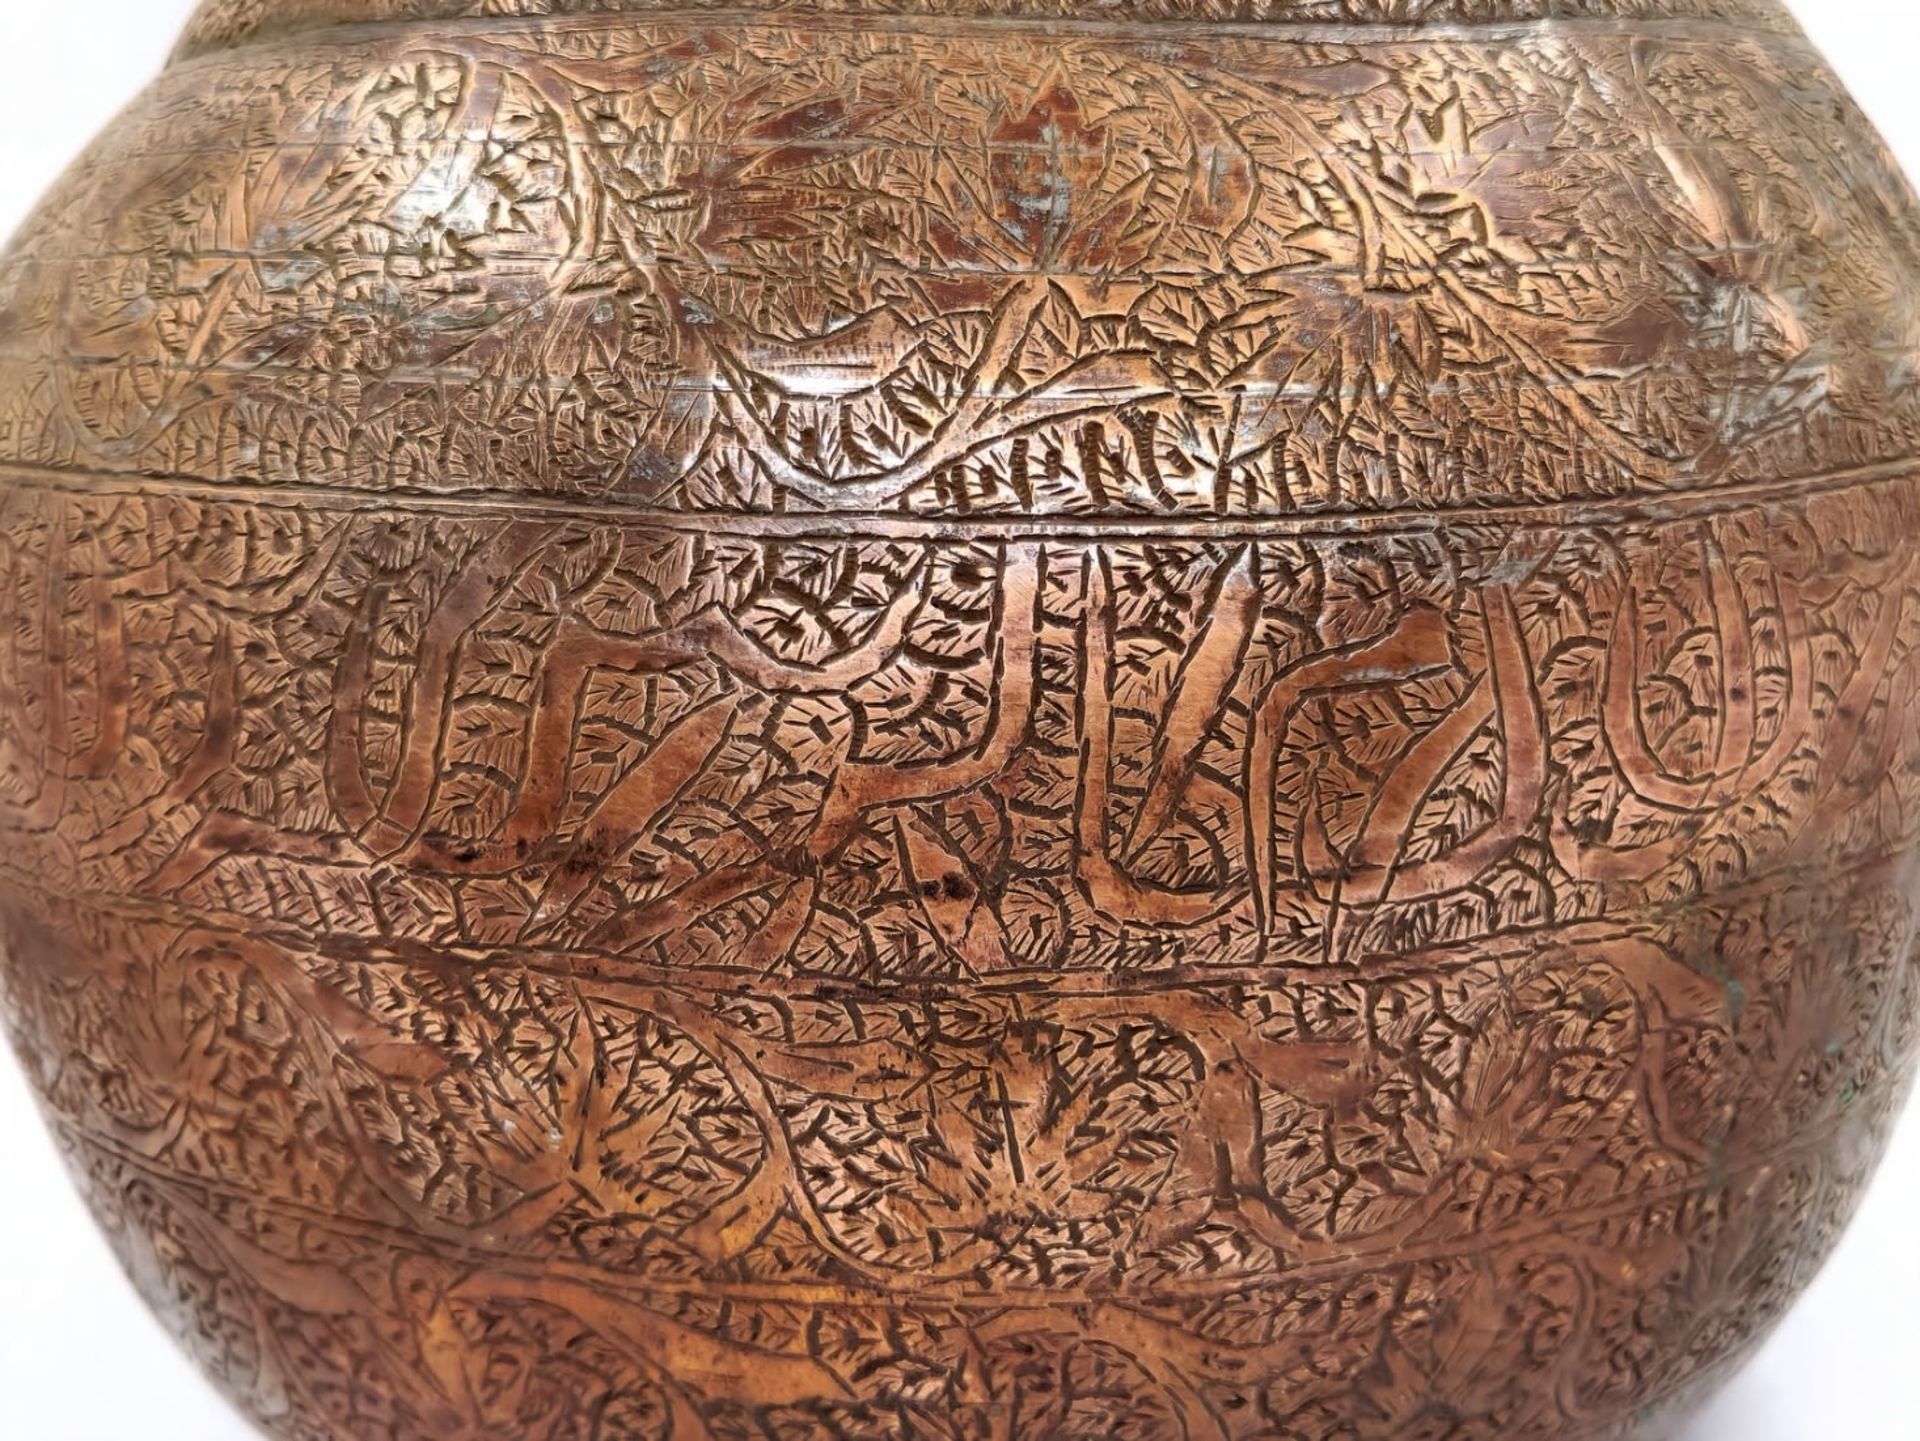 A large and beautiful antique Asian water jug from the 19th century, made in the Dhamrai region, - Image 4 of 8